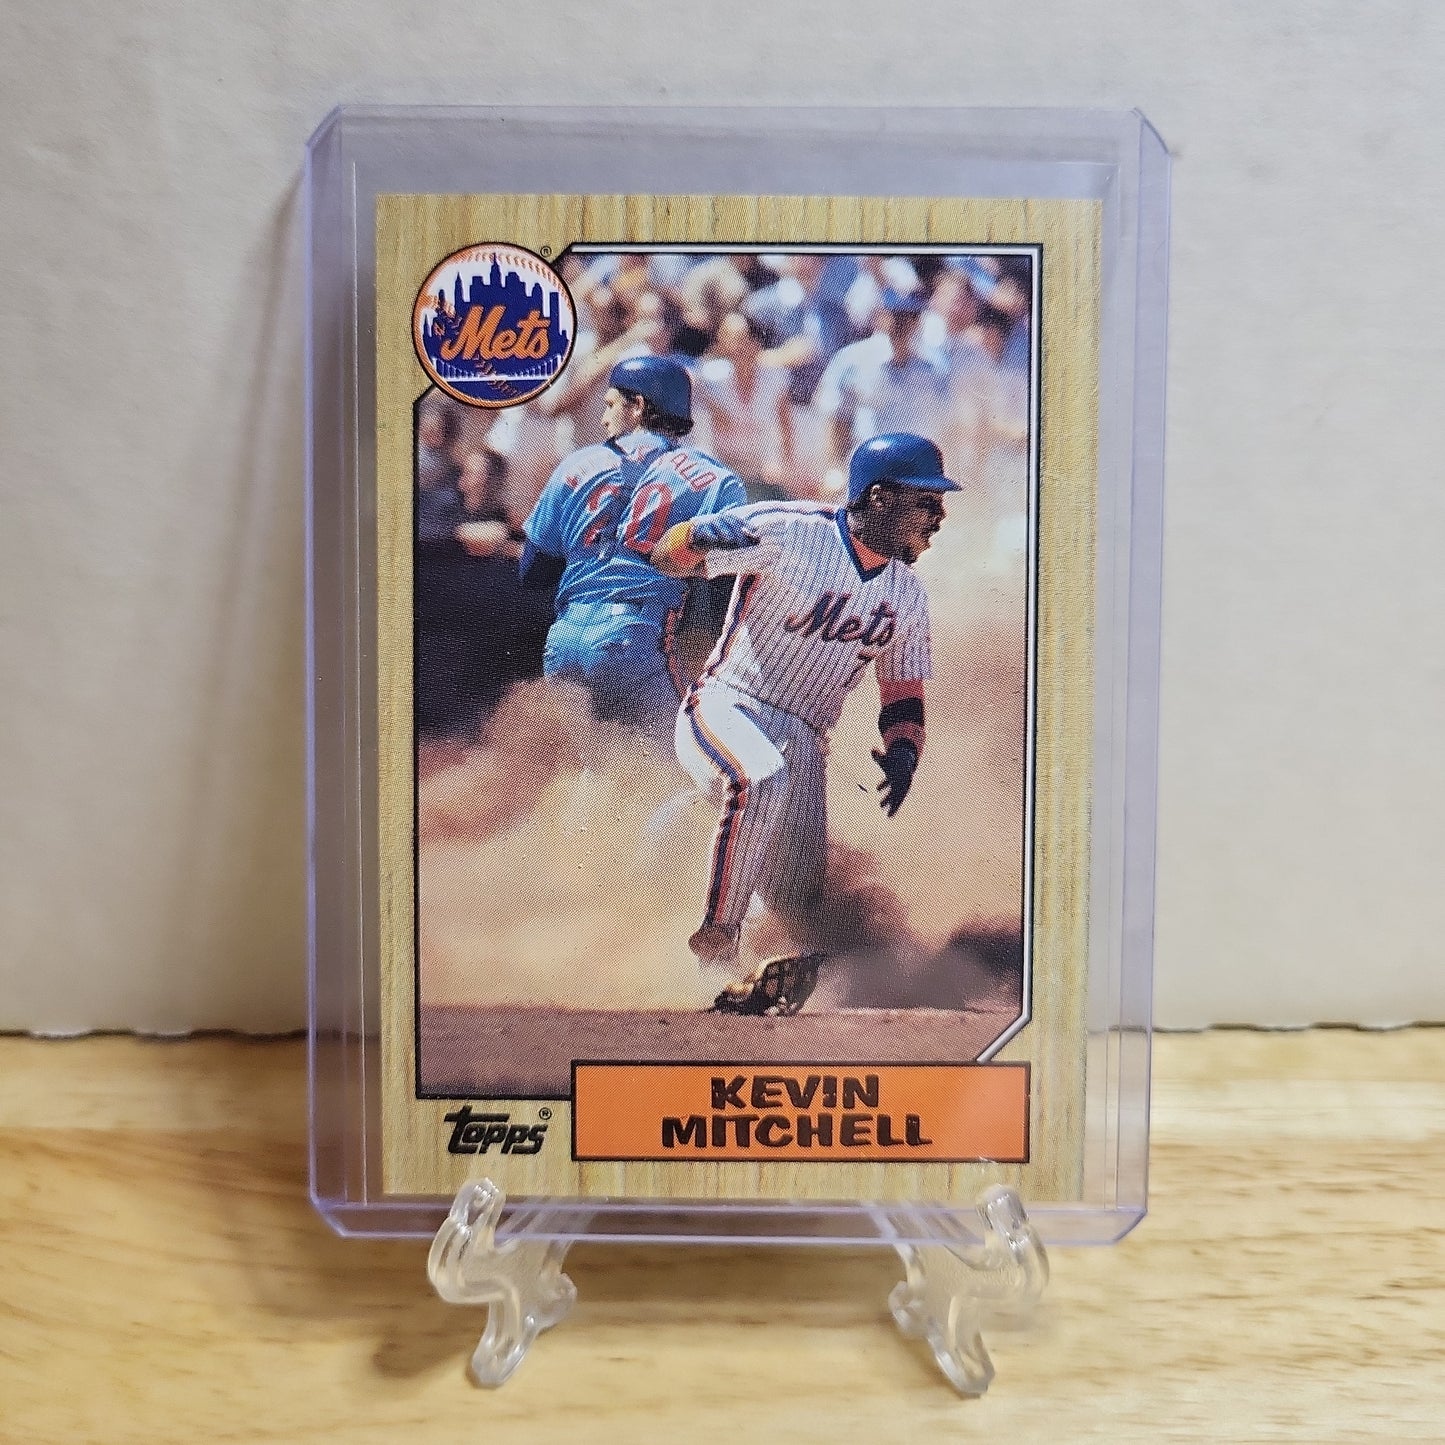 1987 Topps Kevin Mitchell #653